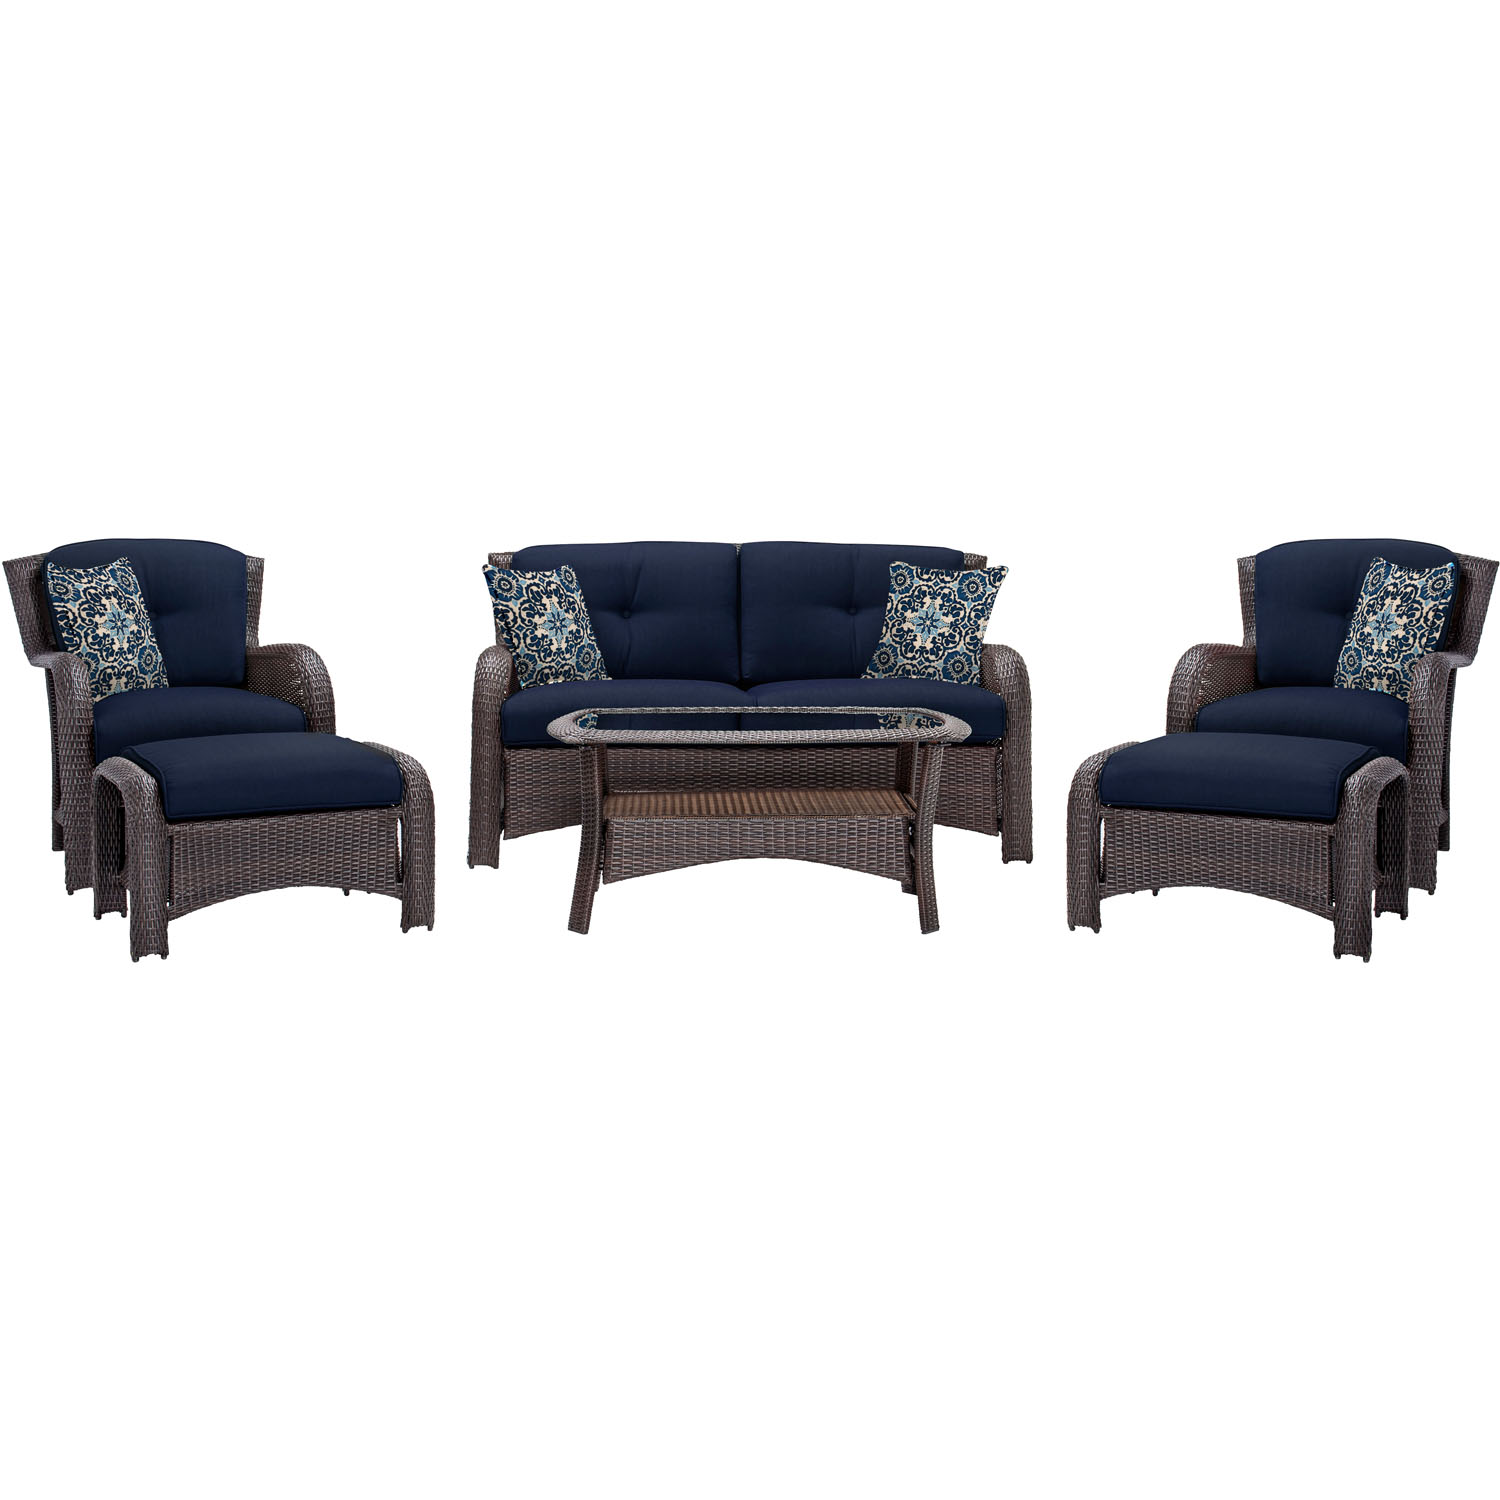 Hanover Strathmere 6-Piece Steel Outdoor Patio Deep Seating Set with Brown Wicker, Navy Blue Cushions, 4 Pillows and Glass Top Rectangular Coffee Table, STRATHMERE6PCNVY - image 1 of 18